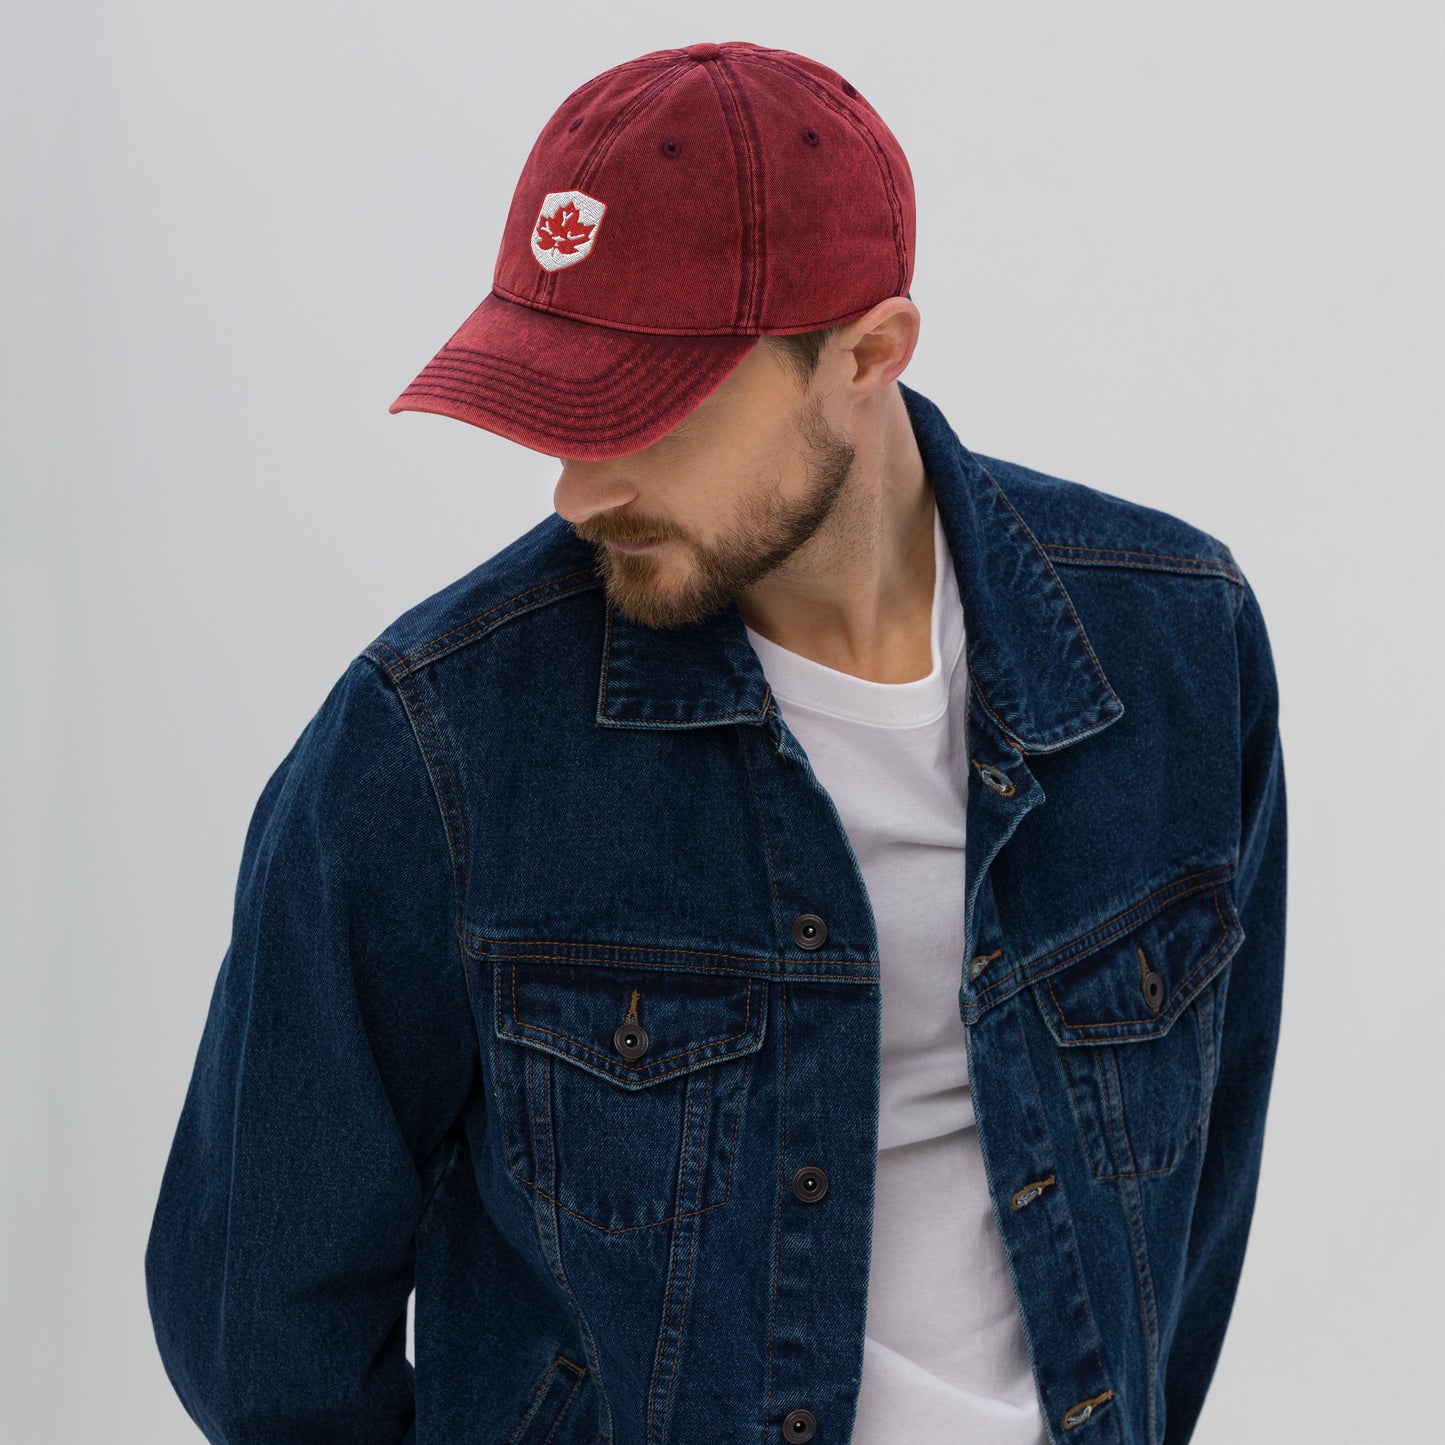 Maple Leaf Twill Cap - Red/White • YYJ Victoria • YHM Designs - Image 08